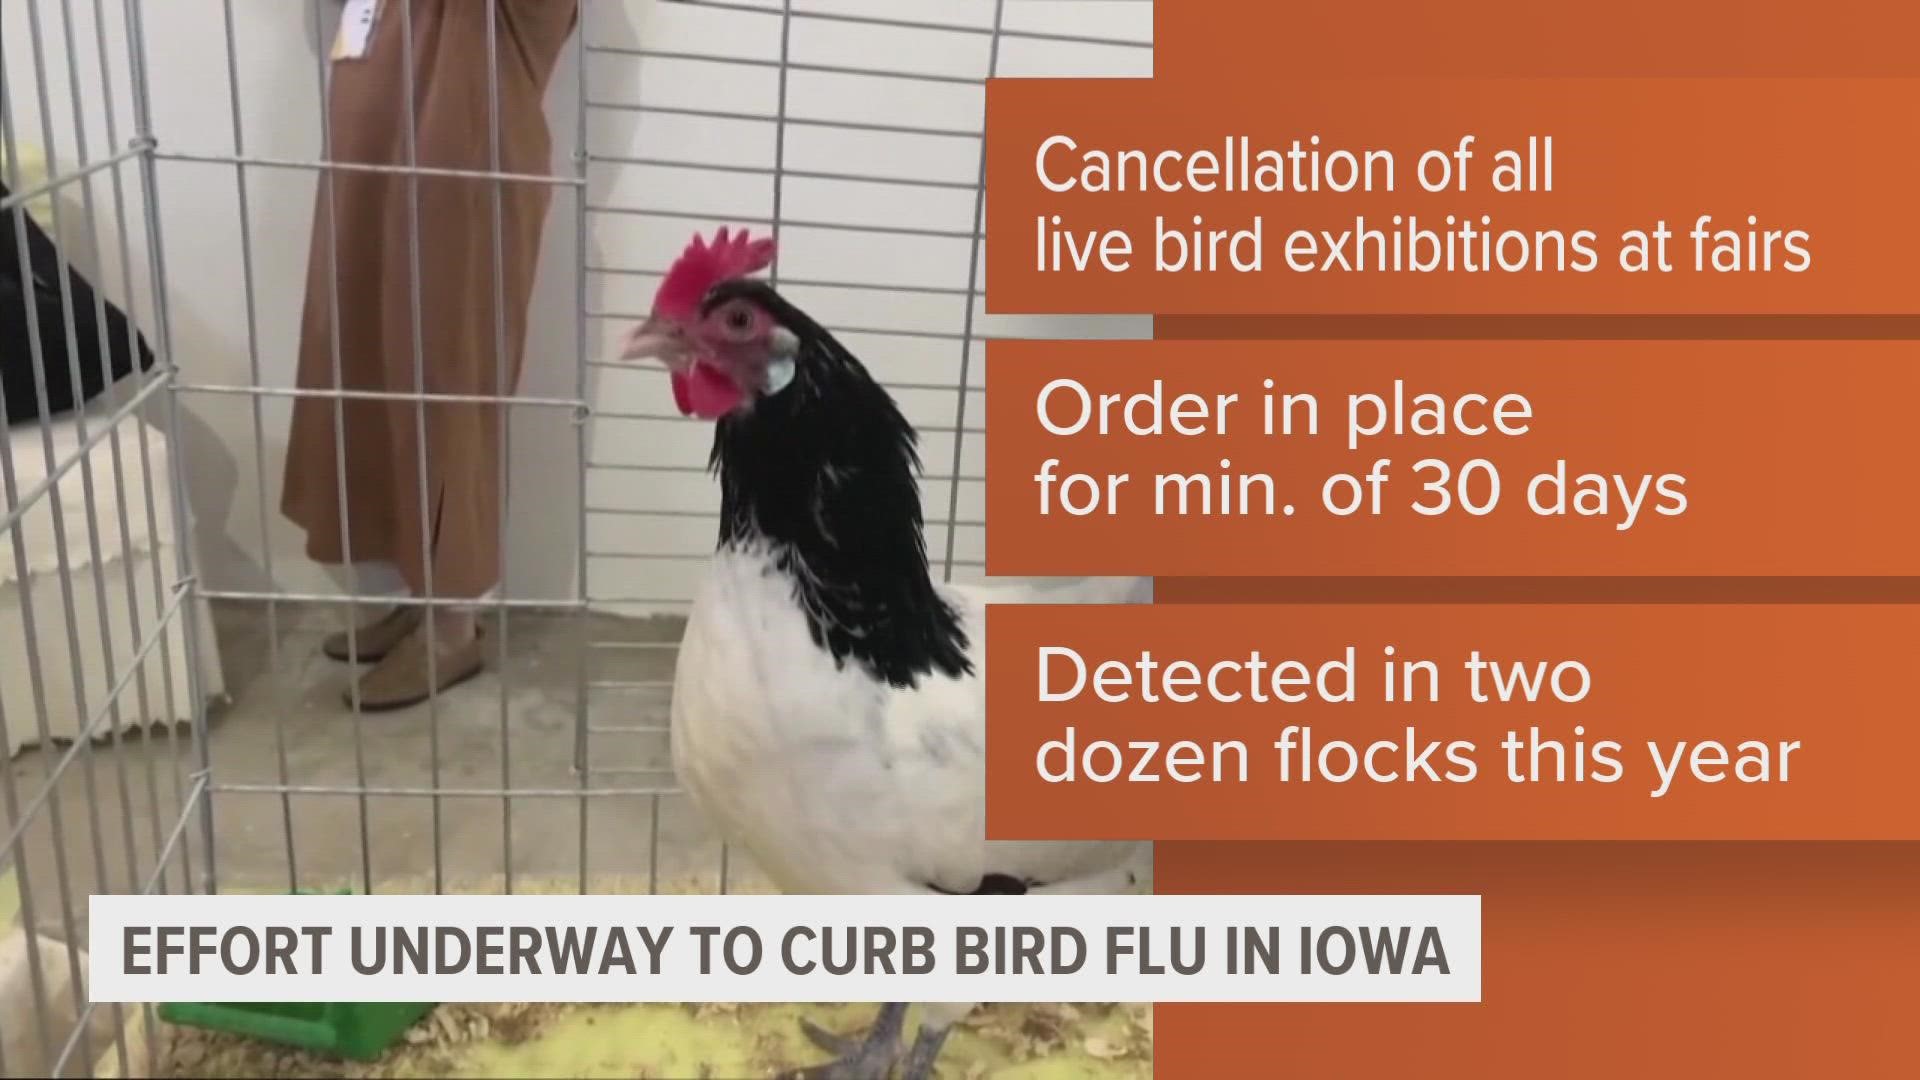 The most recent case in Iowa was reported Tuesday in Louisa County in a backyard flock of 20 birds.